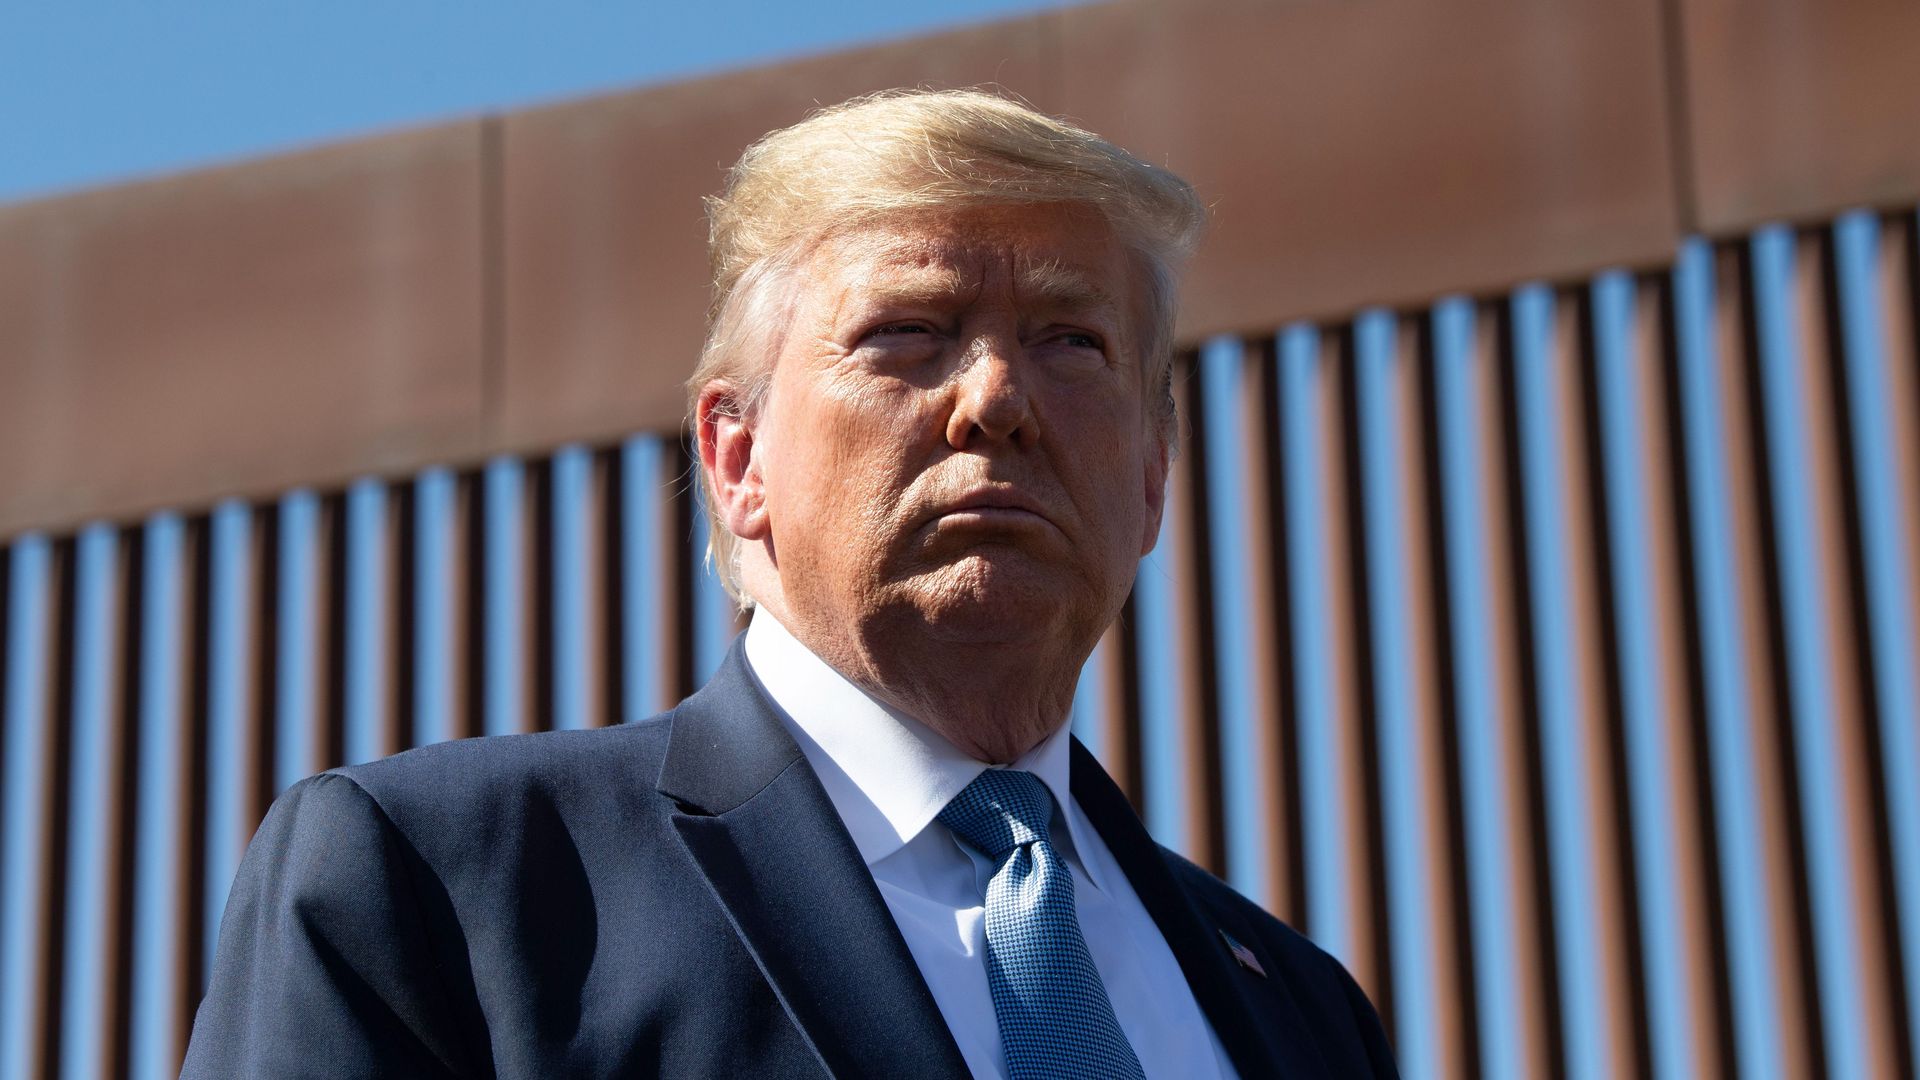 President Donald Trump visits the US-Mexico border fence in Otay Mesa, California on September 18